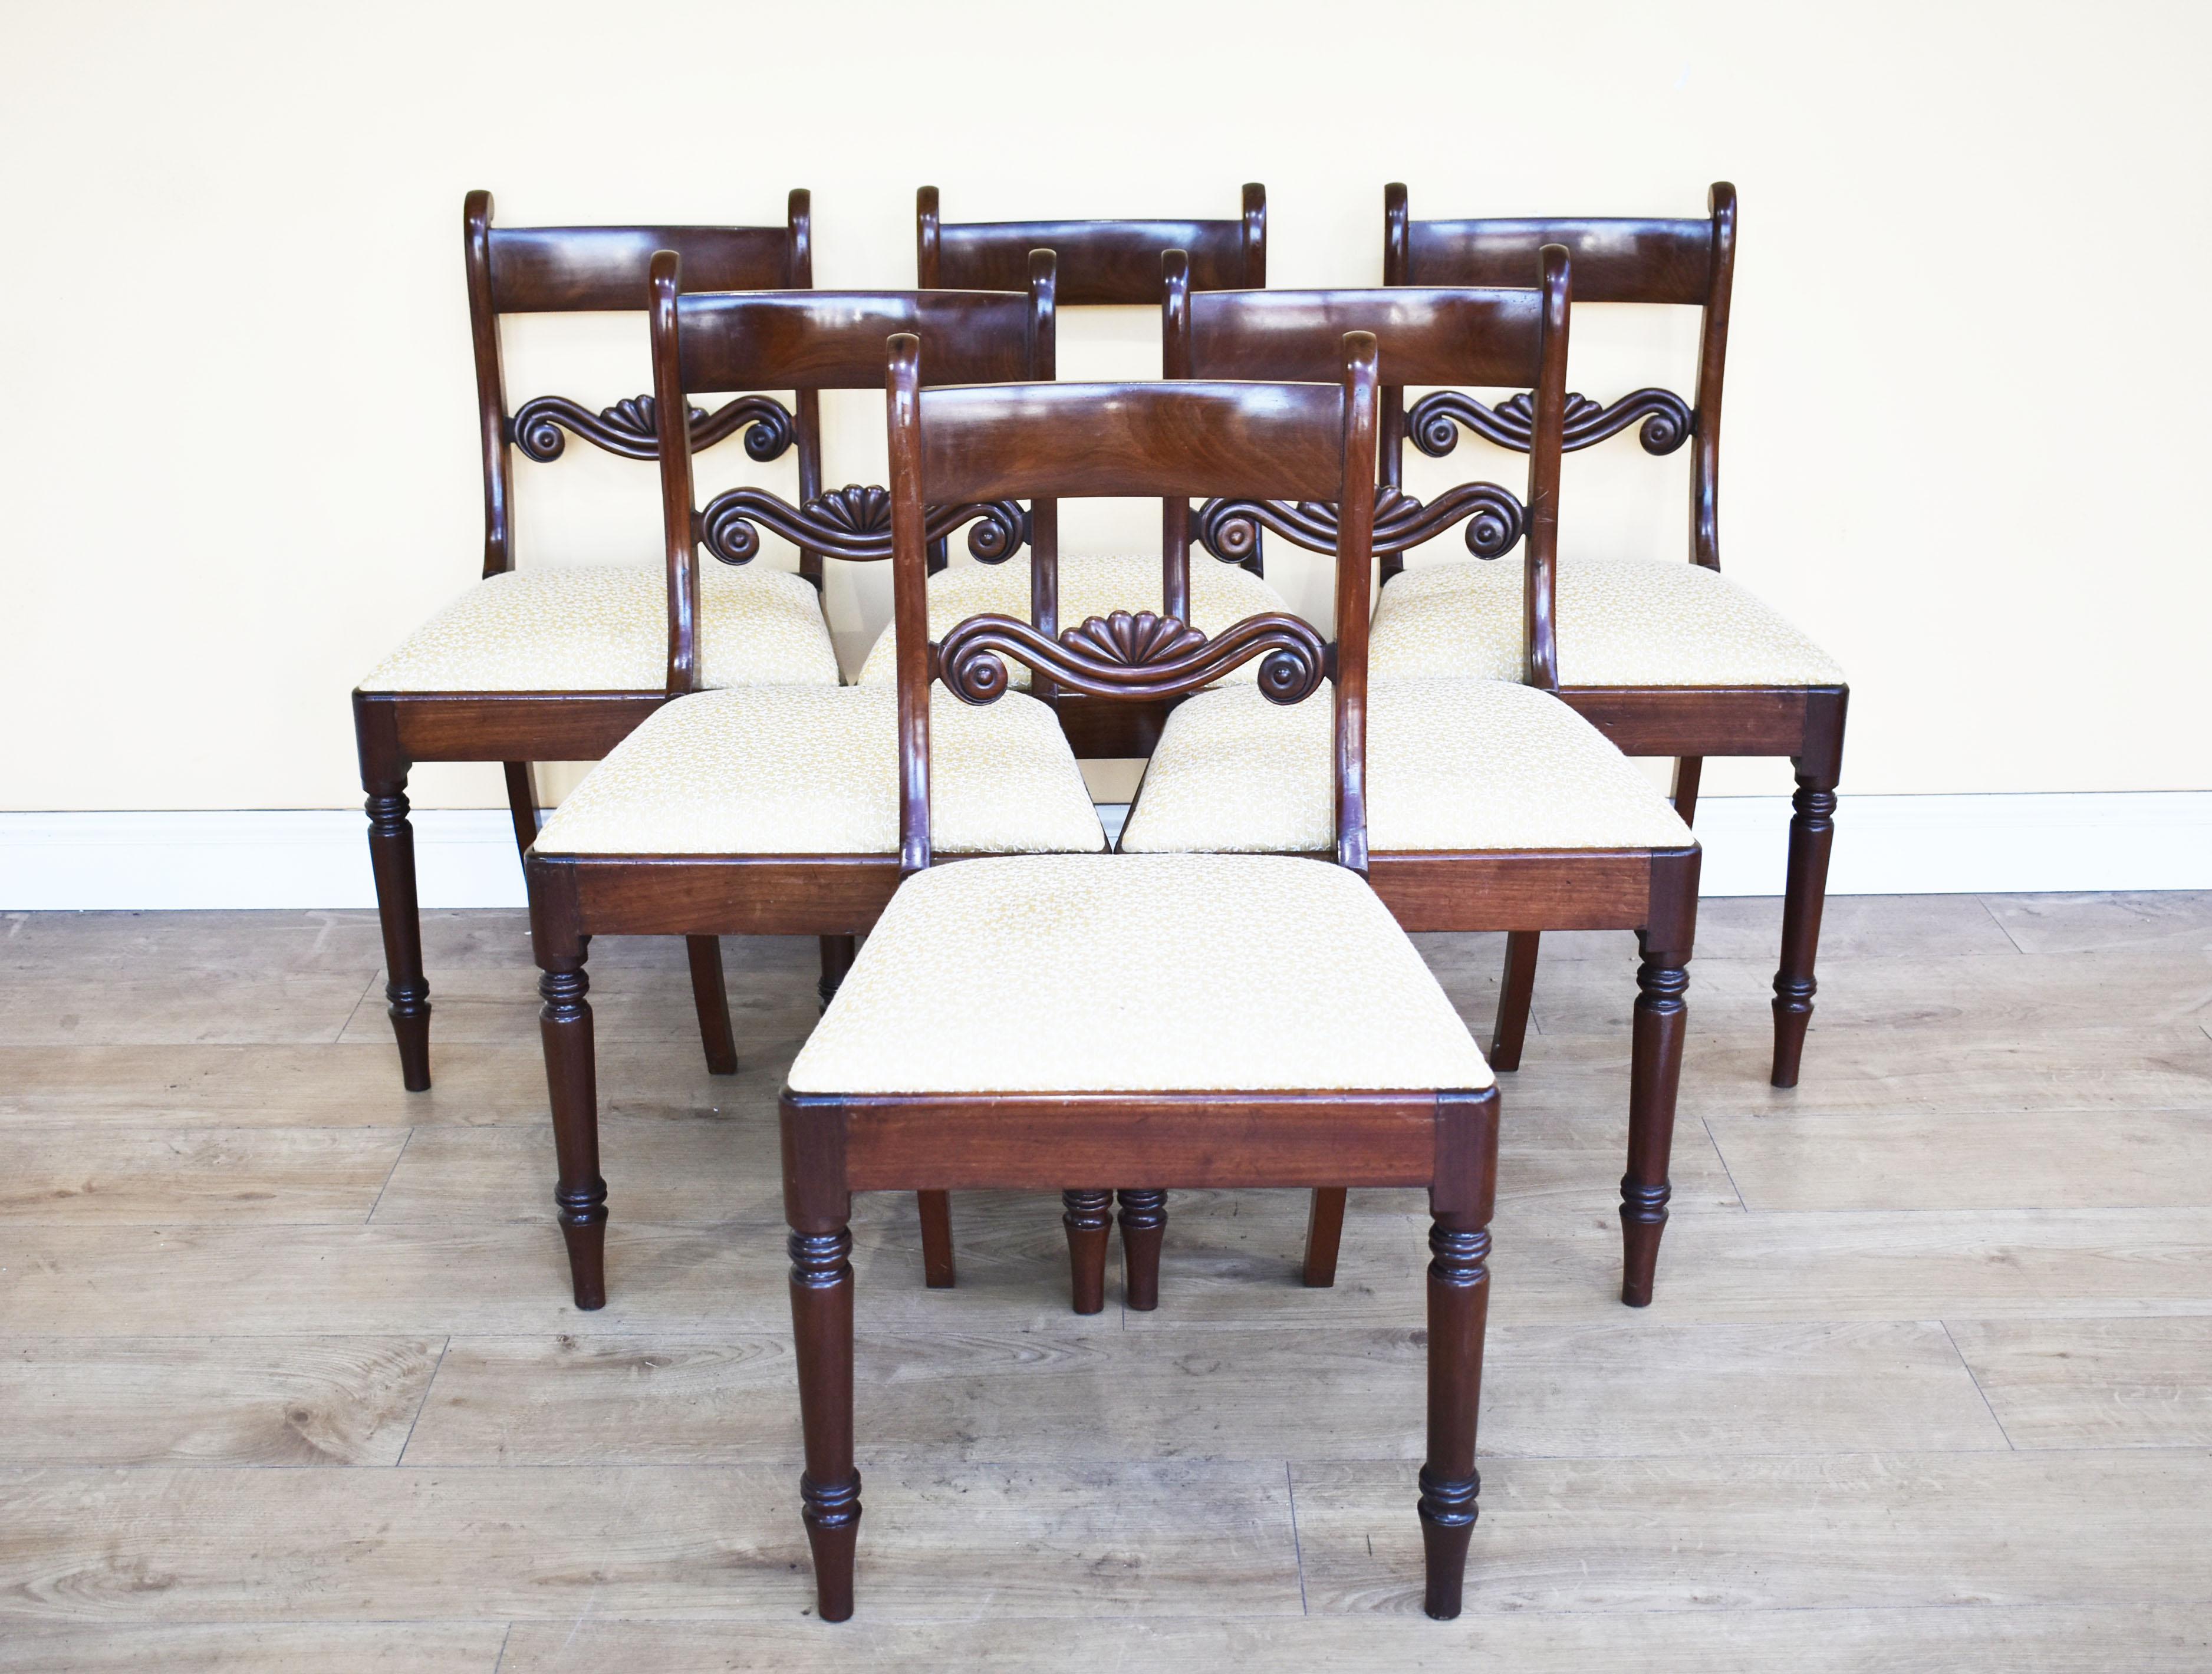 For sale is a set of 8 mahogany dining chairs, each with bar backs above a carved central rail, 19th century. Each chair has a drop in seat and stands on finely turned legs. All of the chairs are in good condition being structurally sound, there are